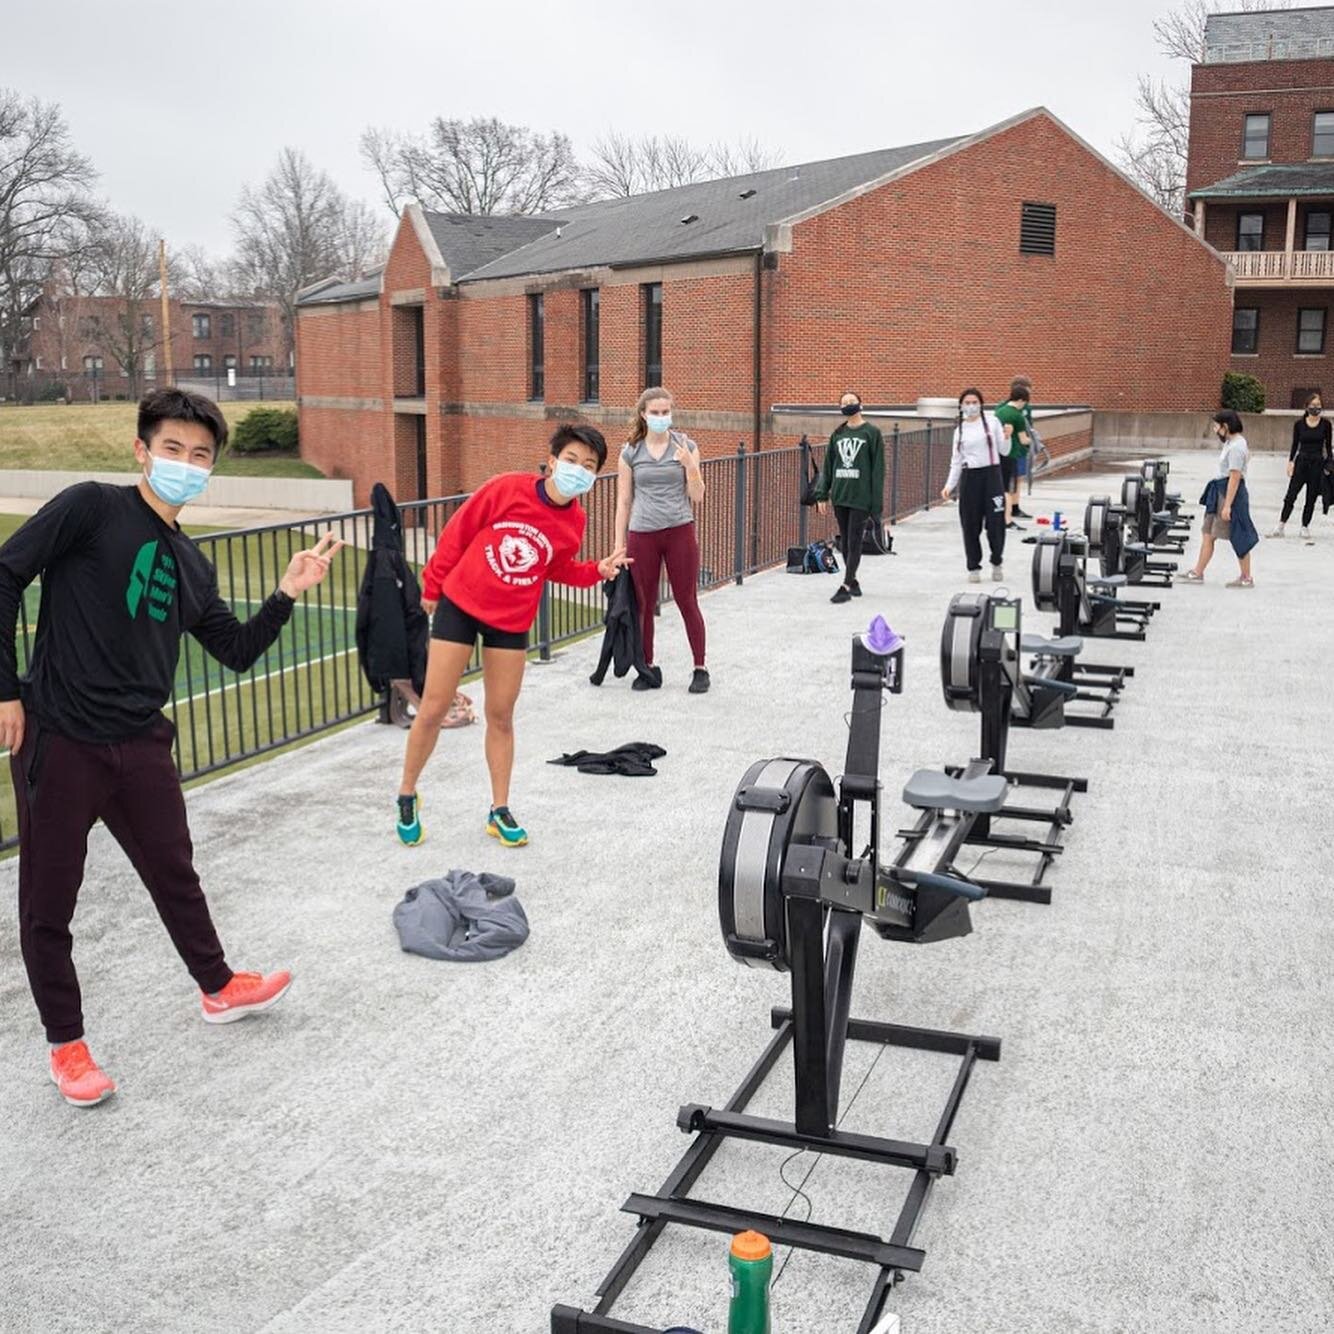 Huge shoutout to our novices who are getting the work done outside while the weather gets better🏋️